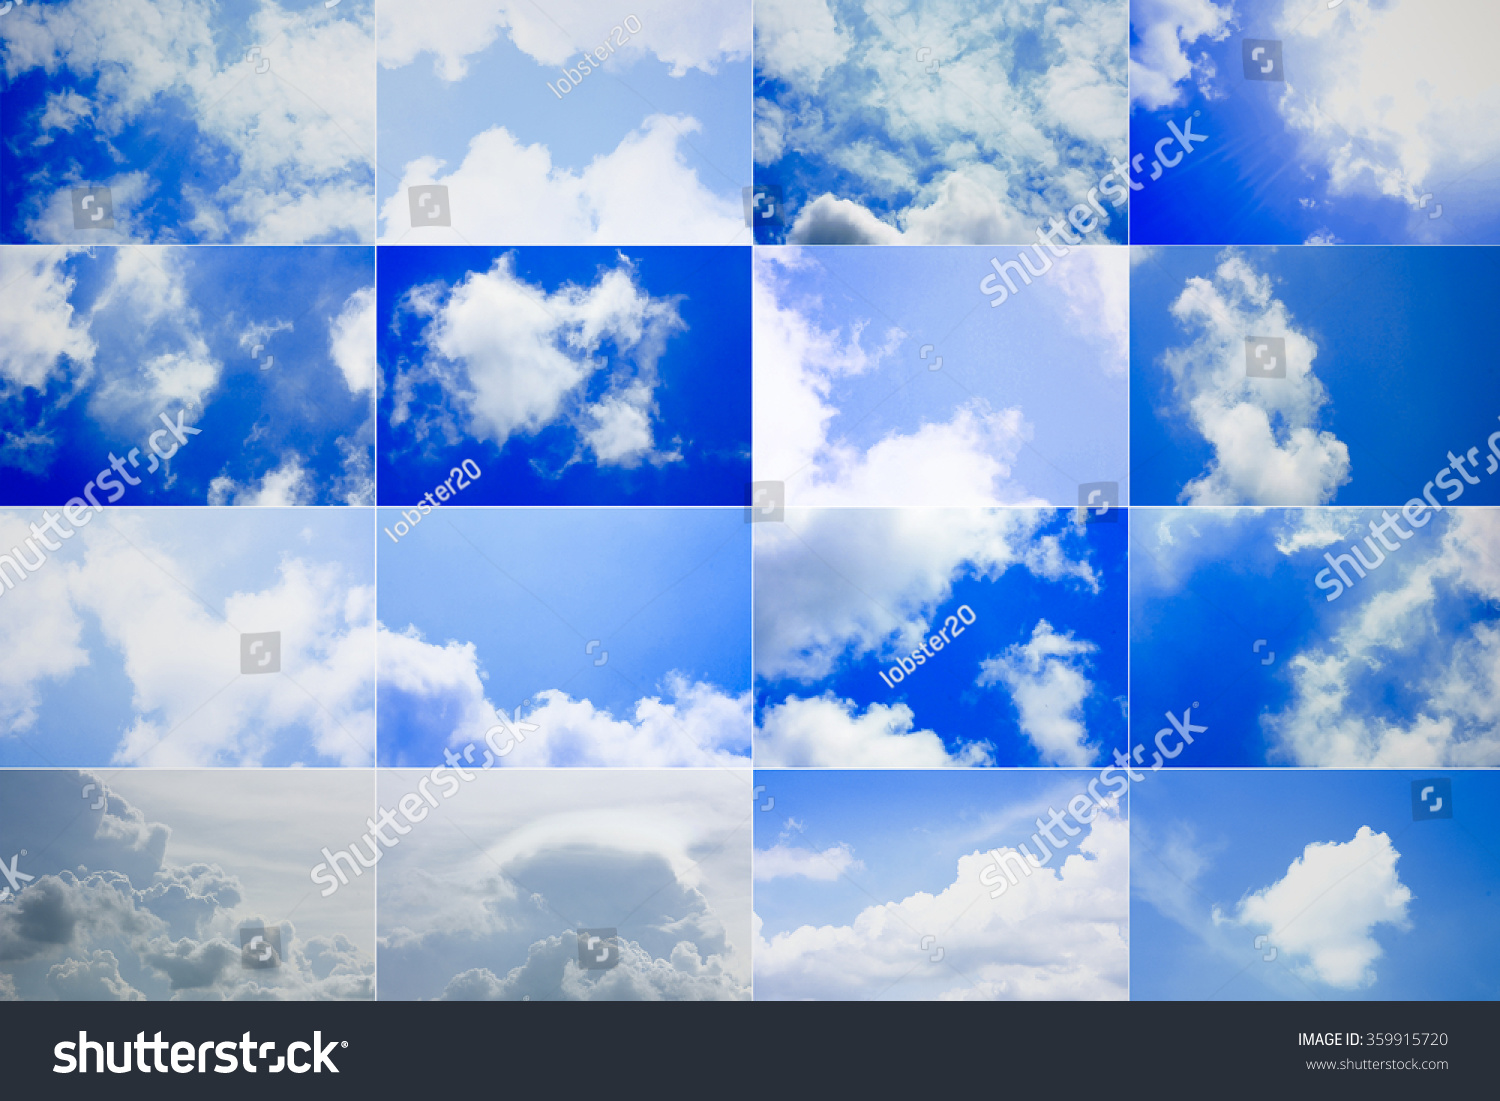 Blue sky and white cloud
 #359915720